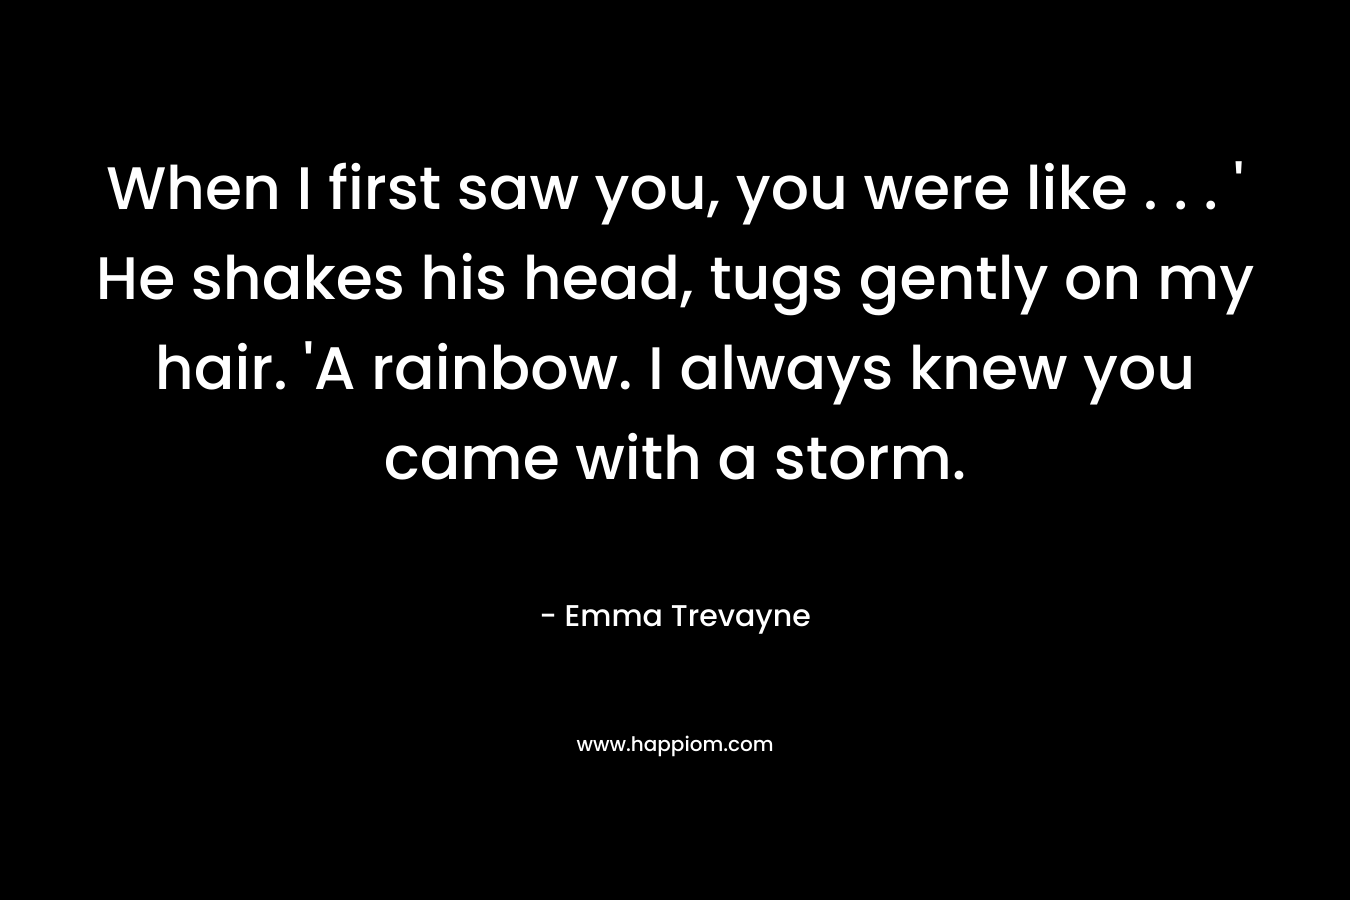 When I first saw you, you were like . . . ' He shakes his head, tugs gently on my hair. 'A rainbow. I always knew you came with a storm.